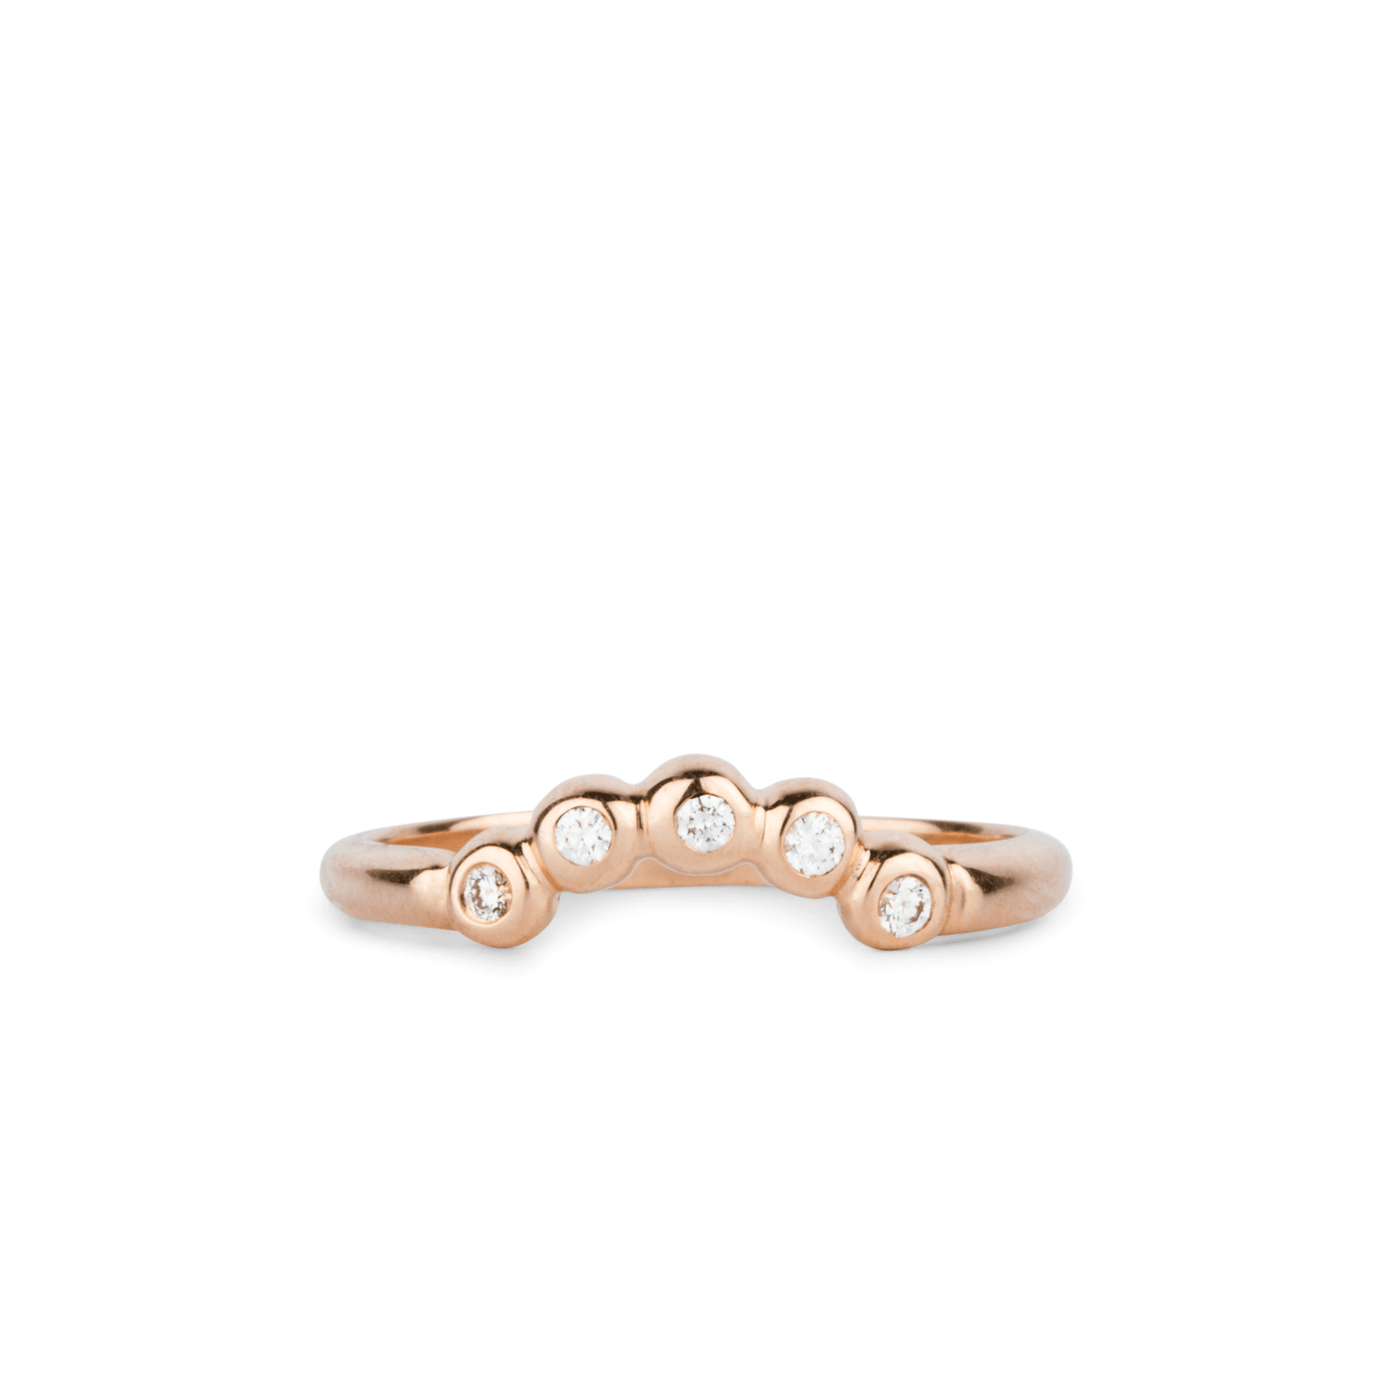 Arched Droplet Band in Rose Gold with White Diamonds by Corey Egan